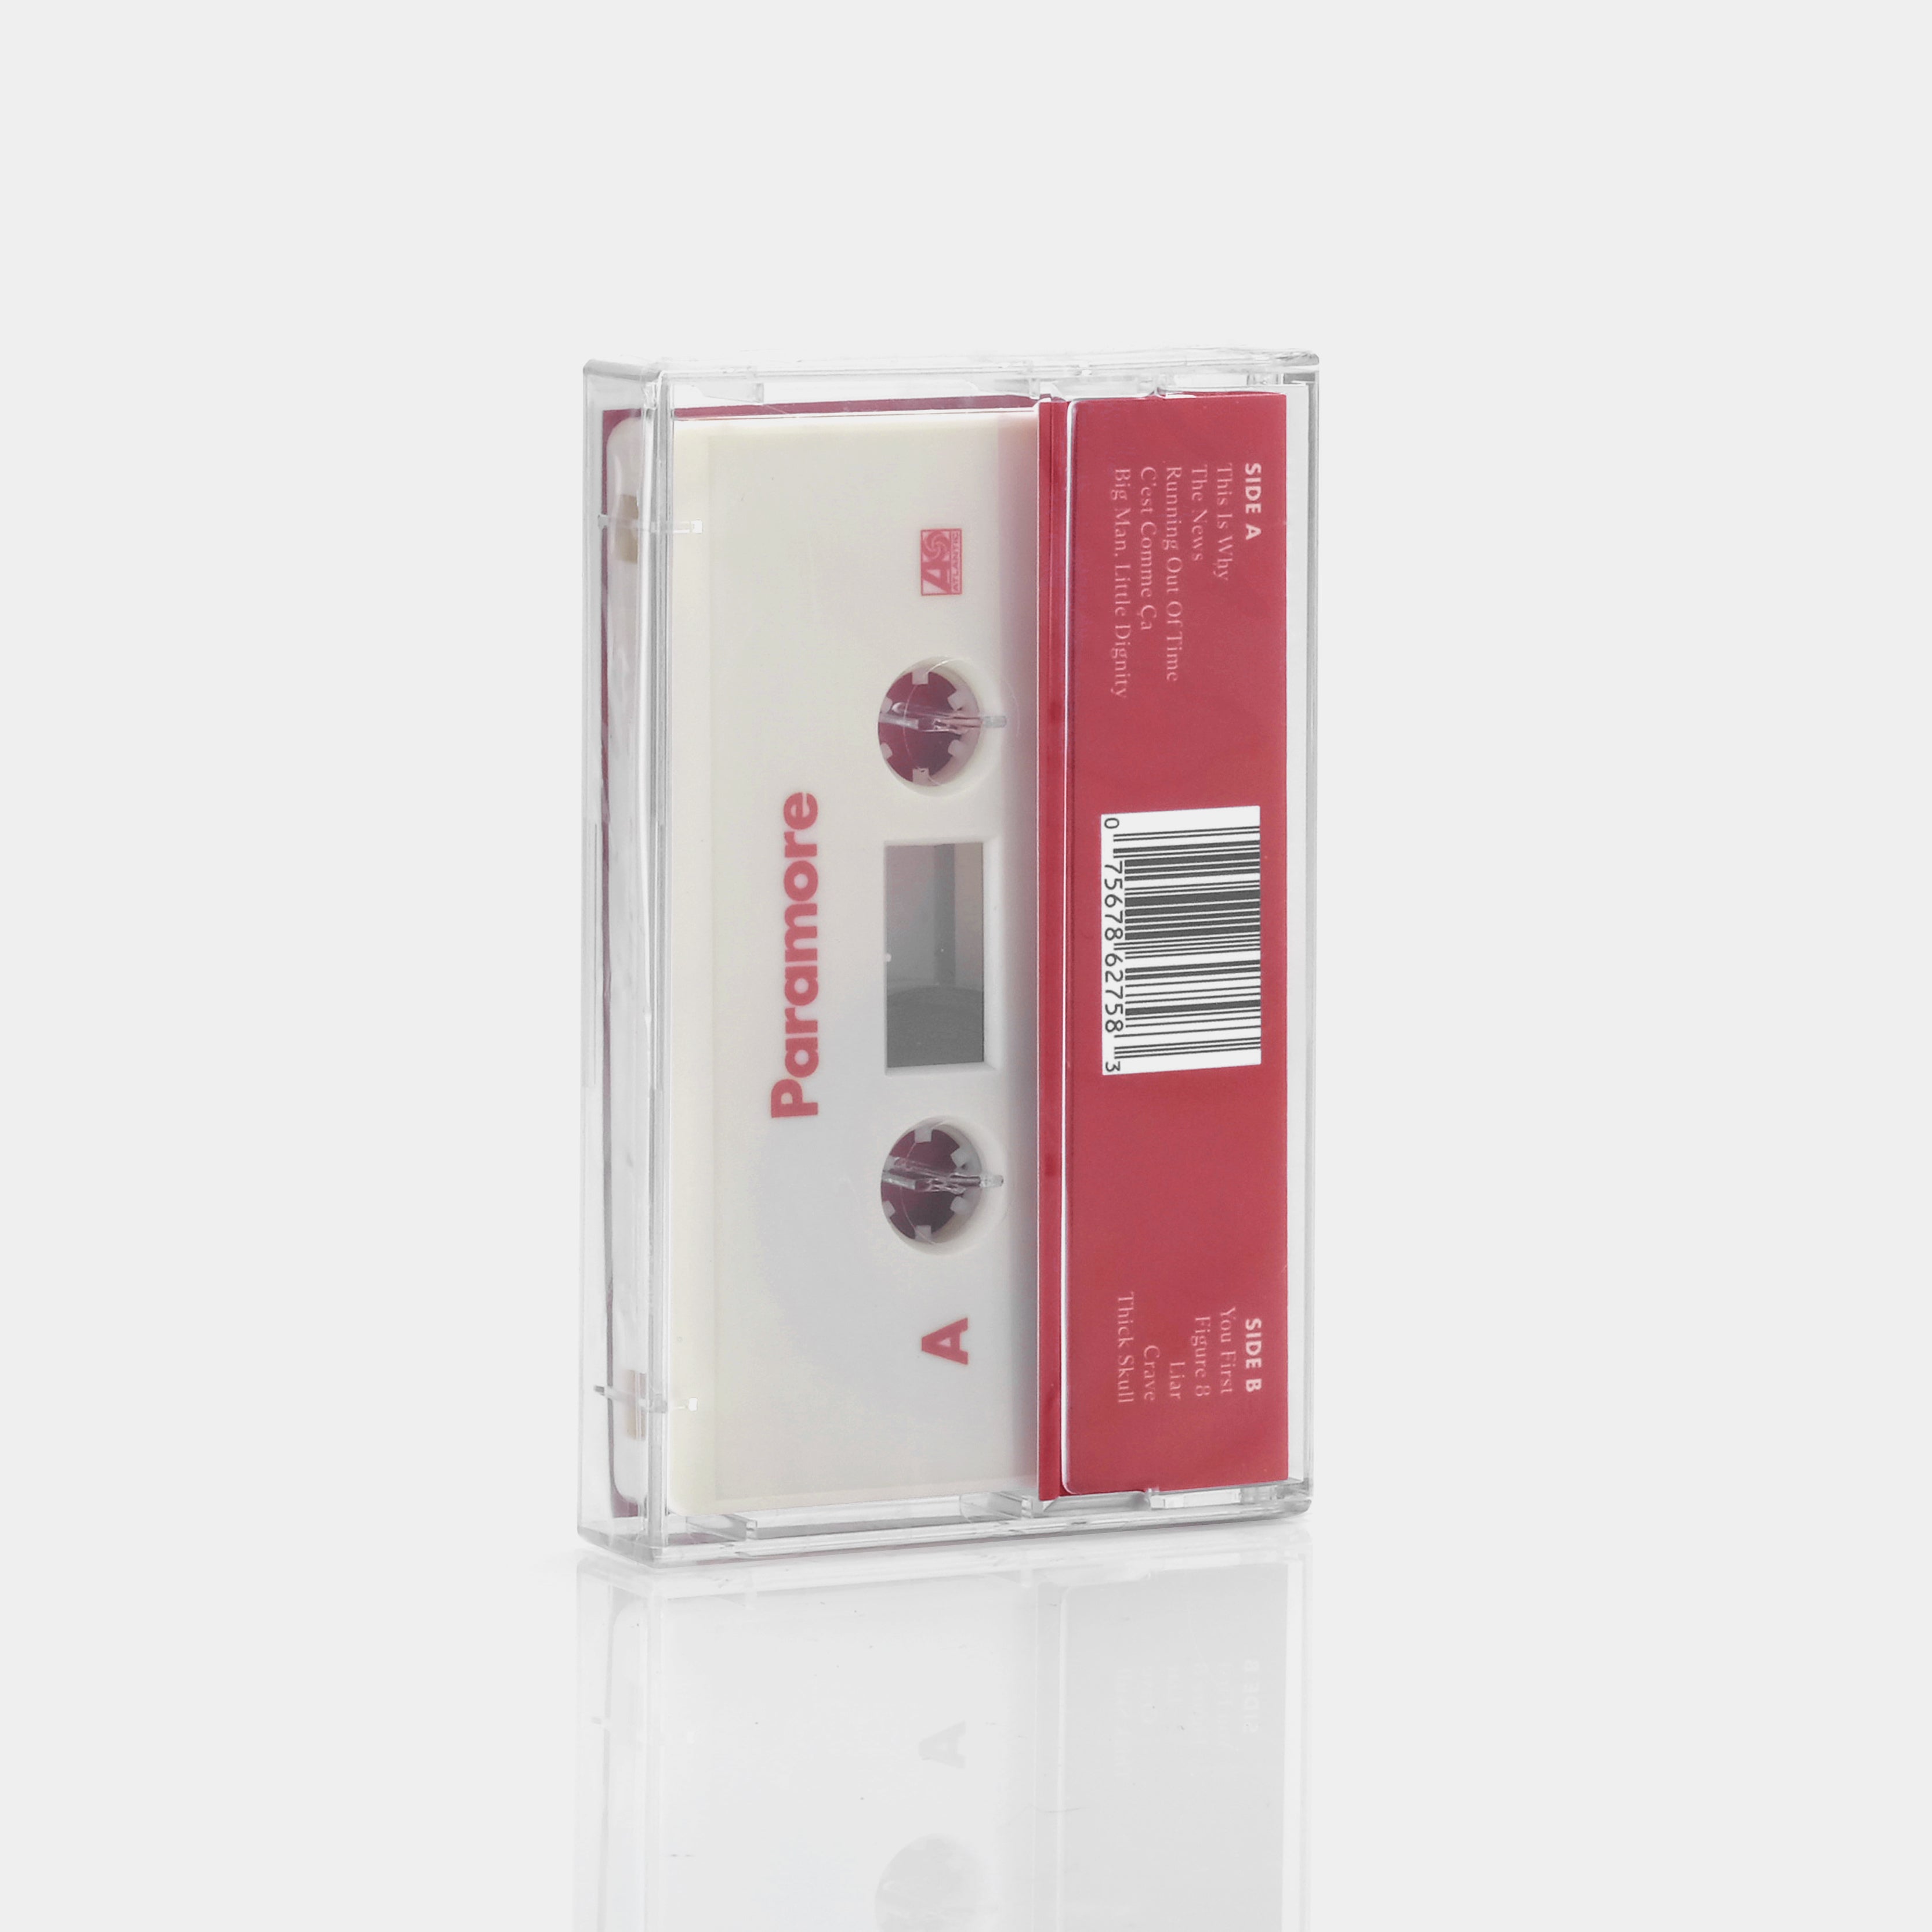 Paramore - This Is Why Cassette Tape